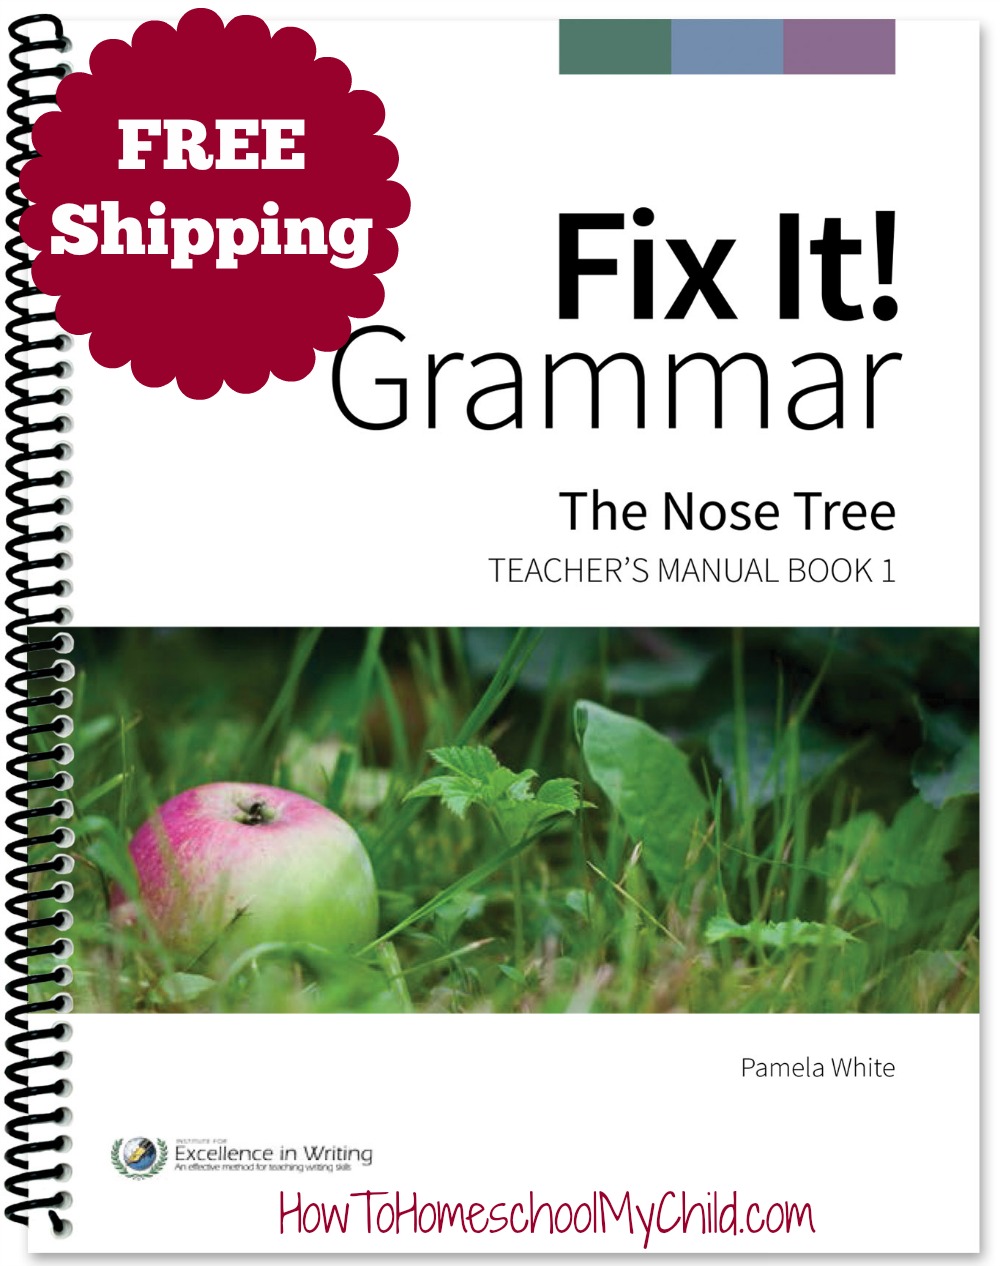 Fix It 1 - Nose Tree ~ learning English grammar the Best way from HowToHomeschoolMyChild.com